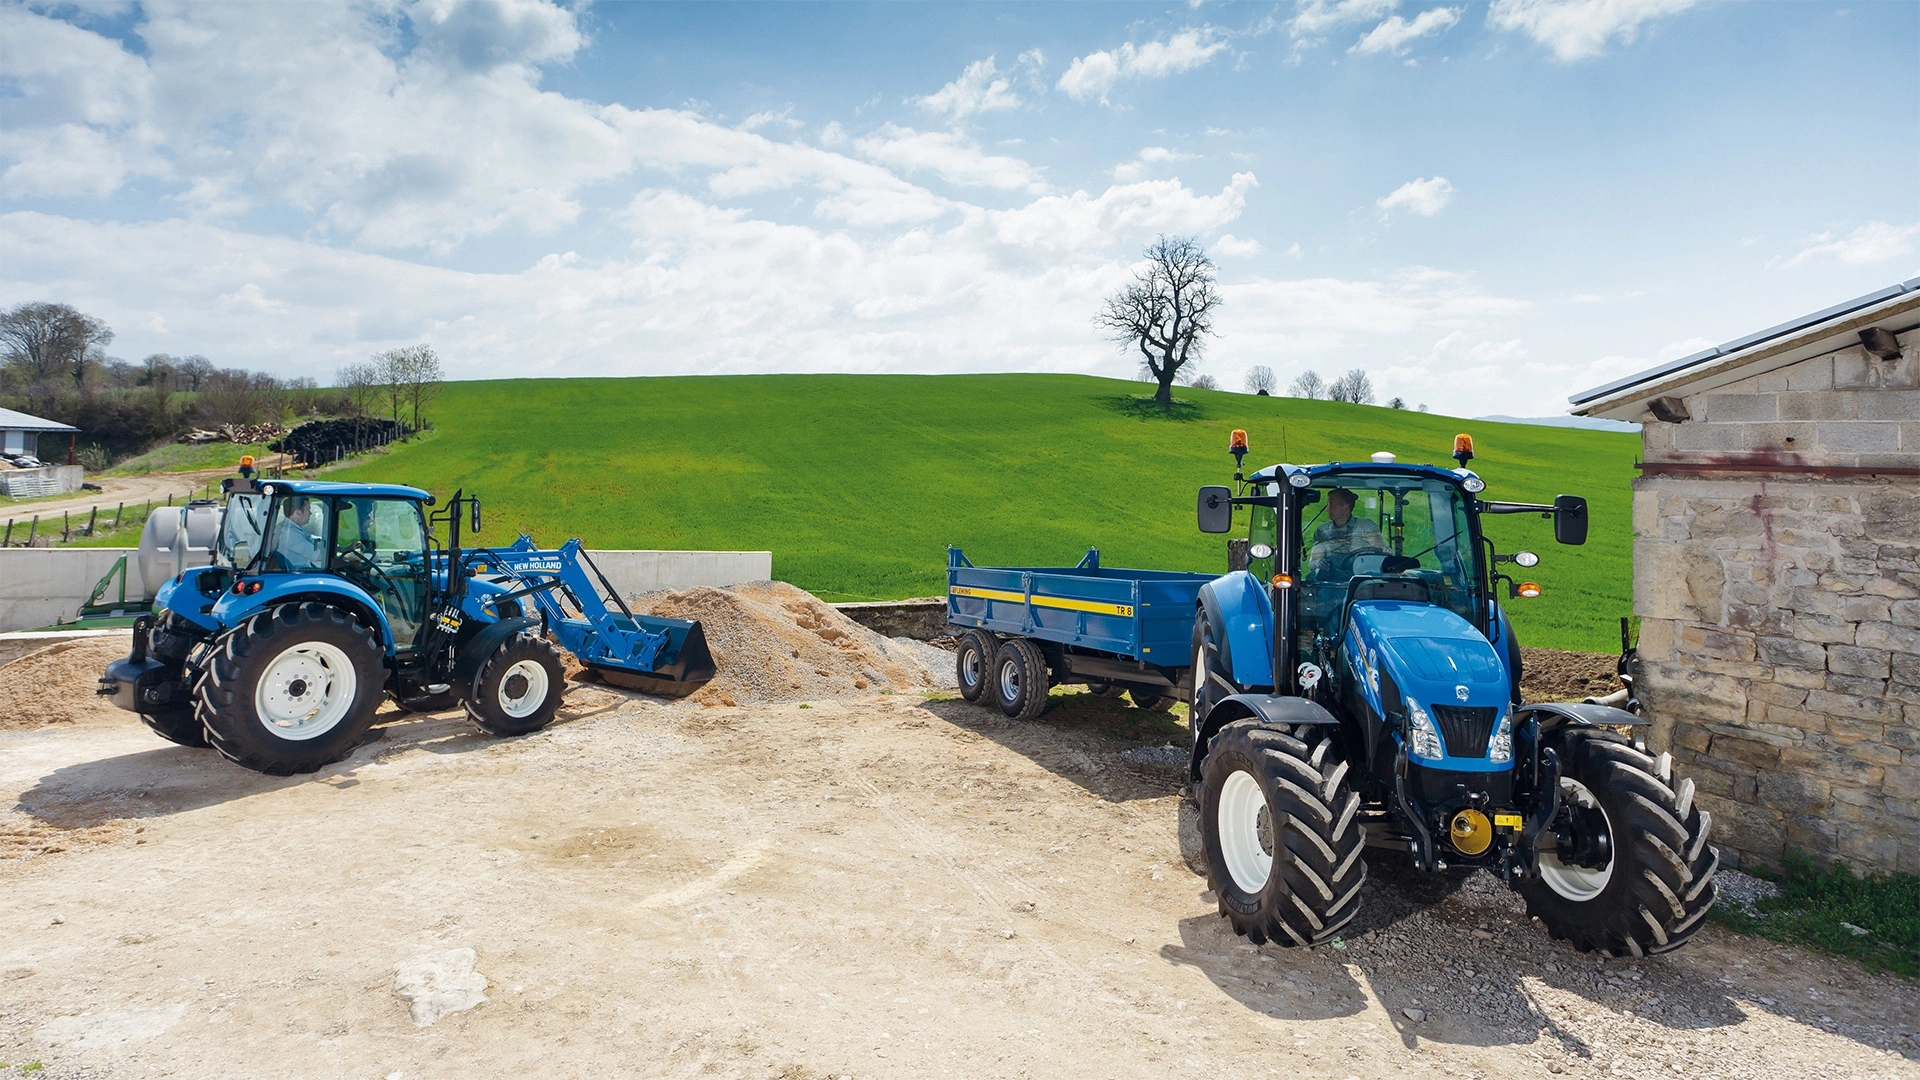 Two New Holland T4 tractors are in a work area. One tractor has a front loader, and the. other tractor has a blue trailer mounted on it. The background features a green hill with a lone tree and a partly cloudy sky.